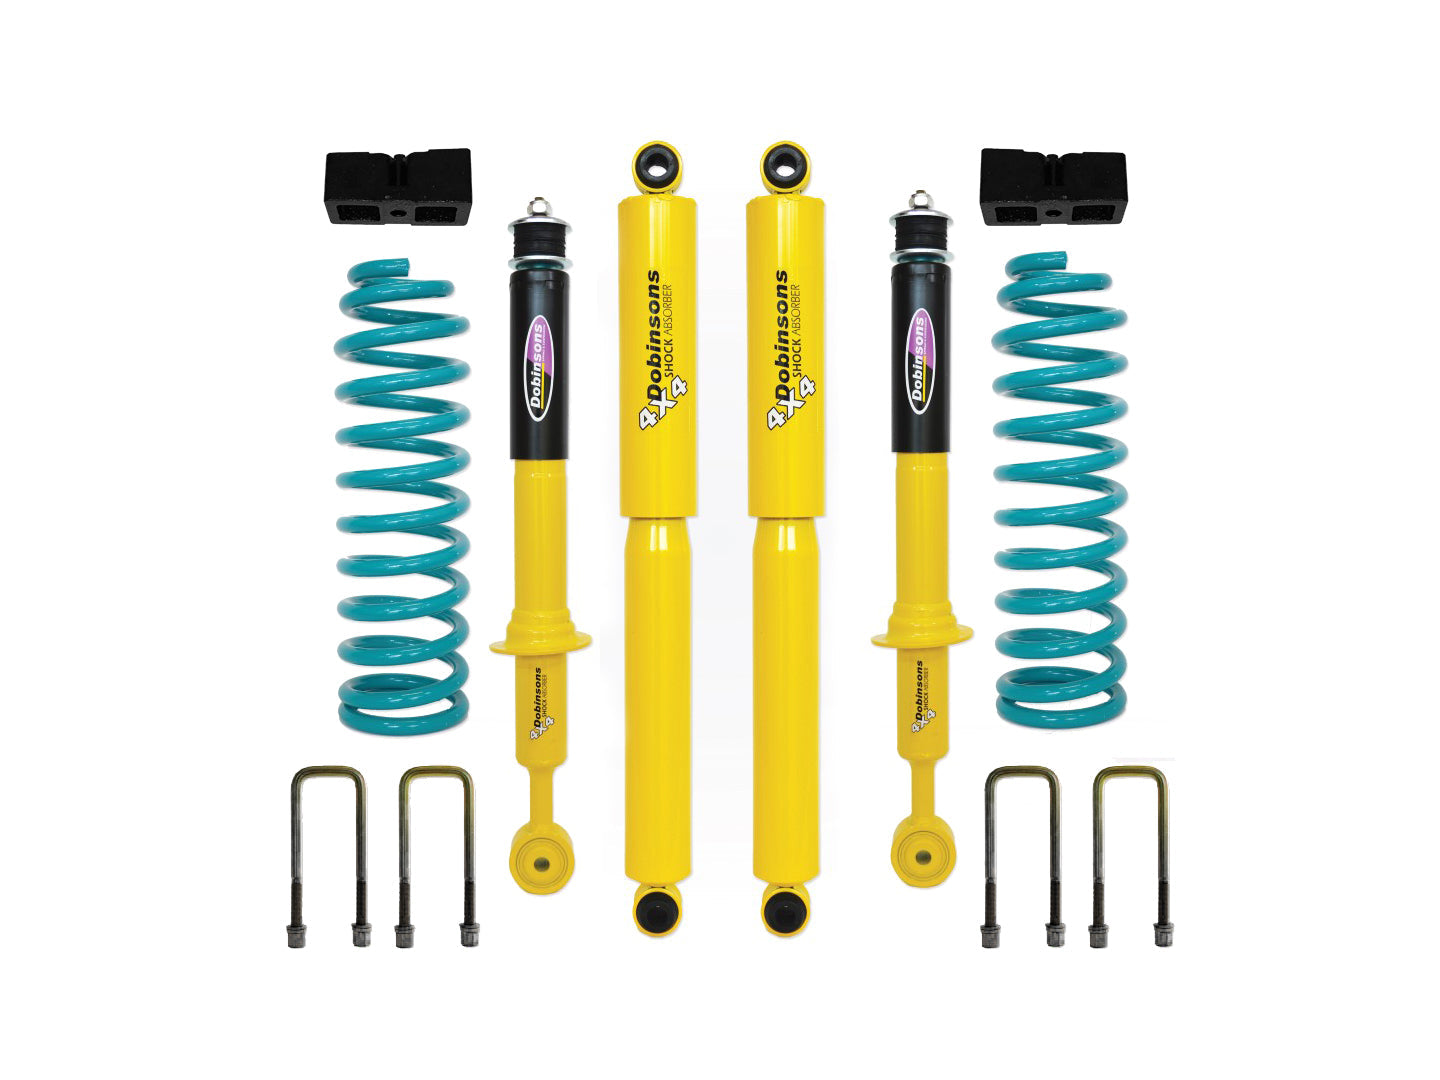 Dobinsons 2-2.5" Suspension Kit for Nissan Navara D40 2005 on with QuickRide Rear